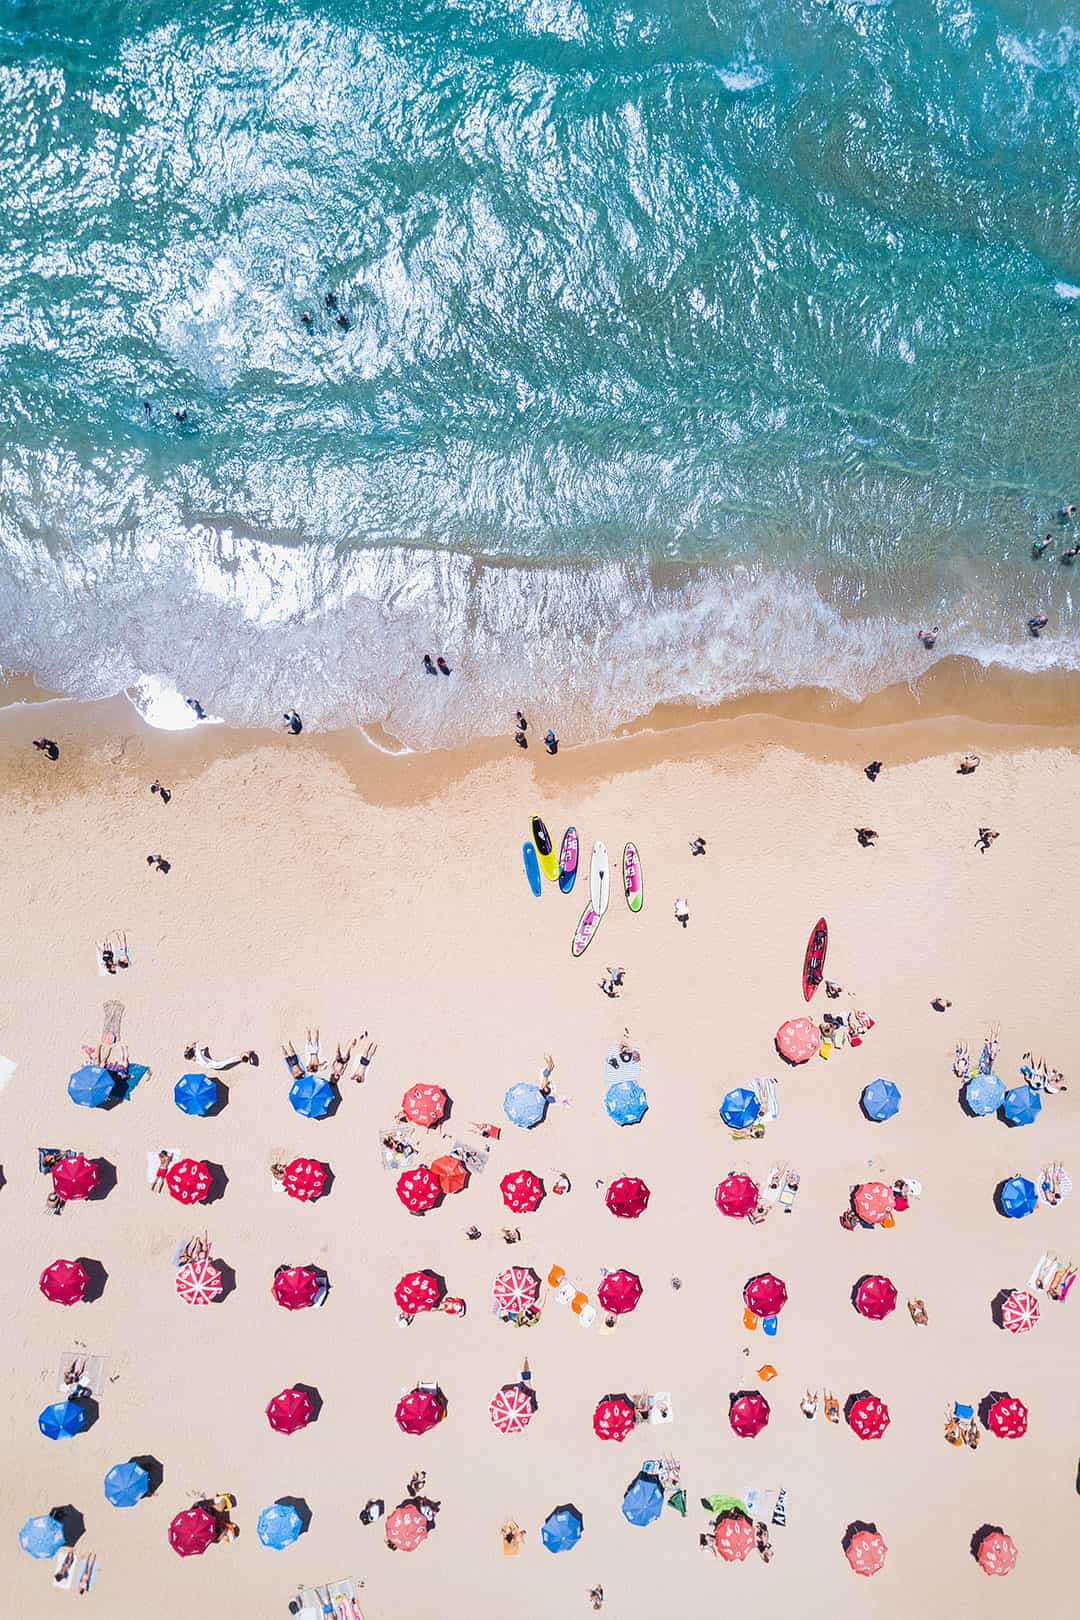 miami beach aerial view + 15 best places to visit in january in the usa